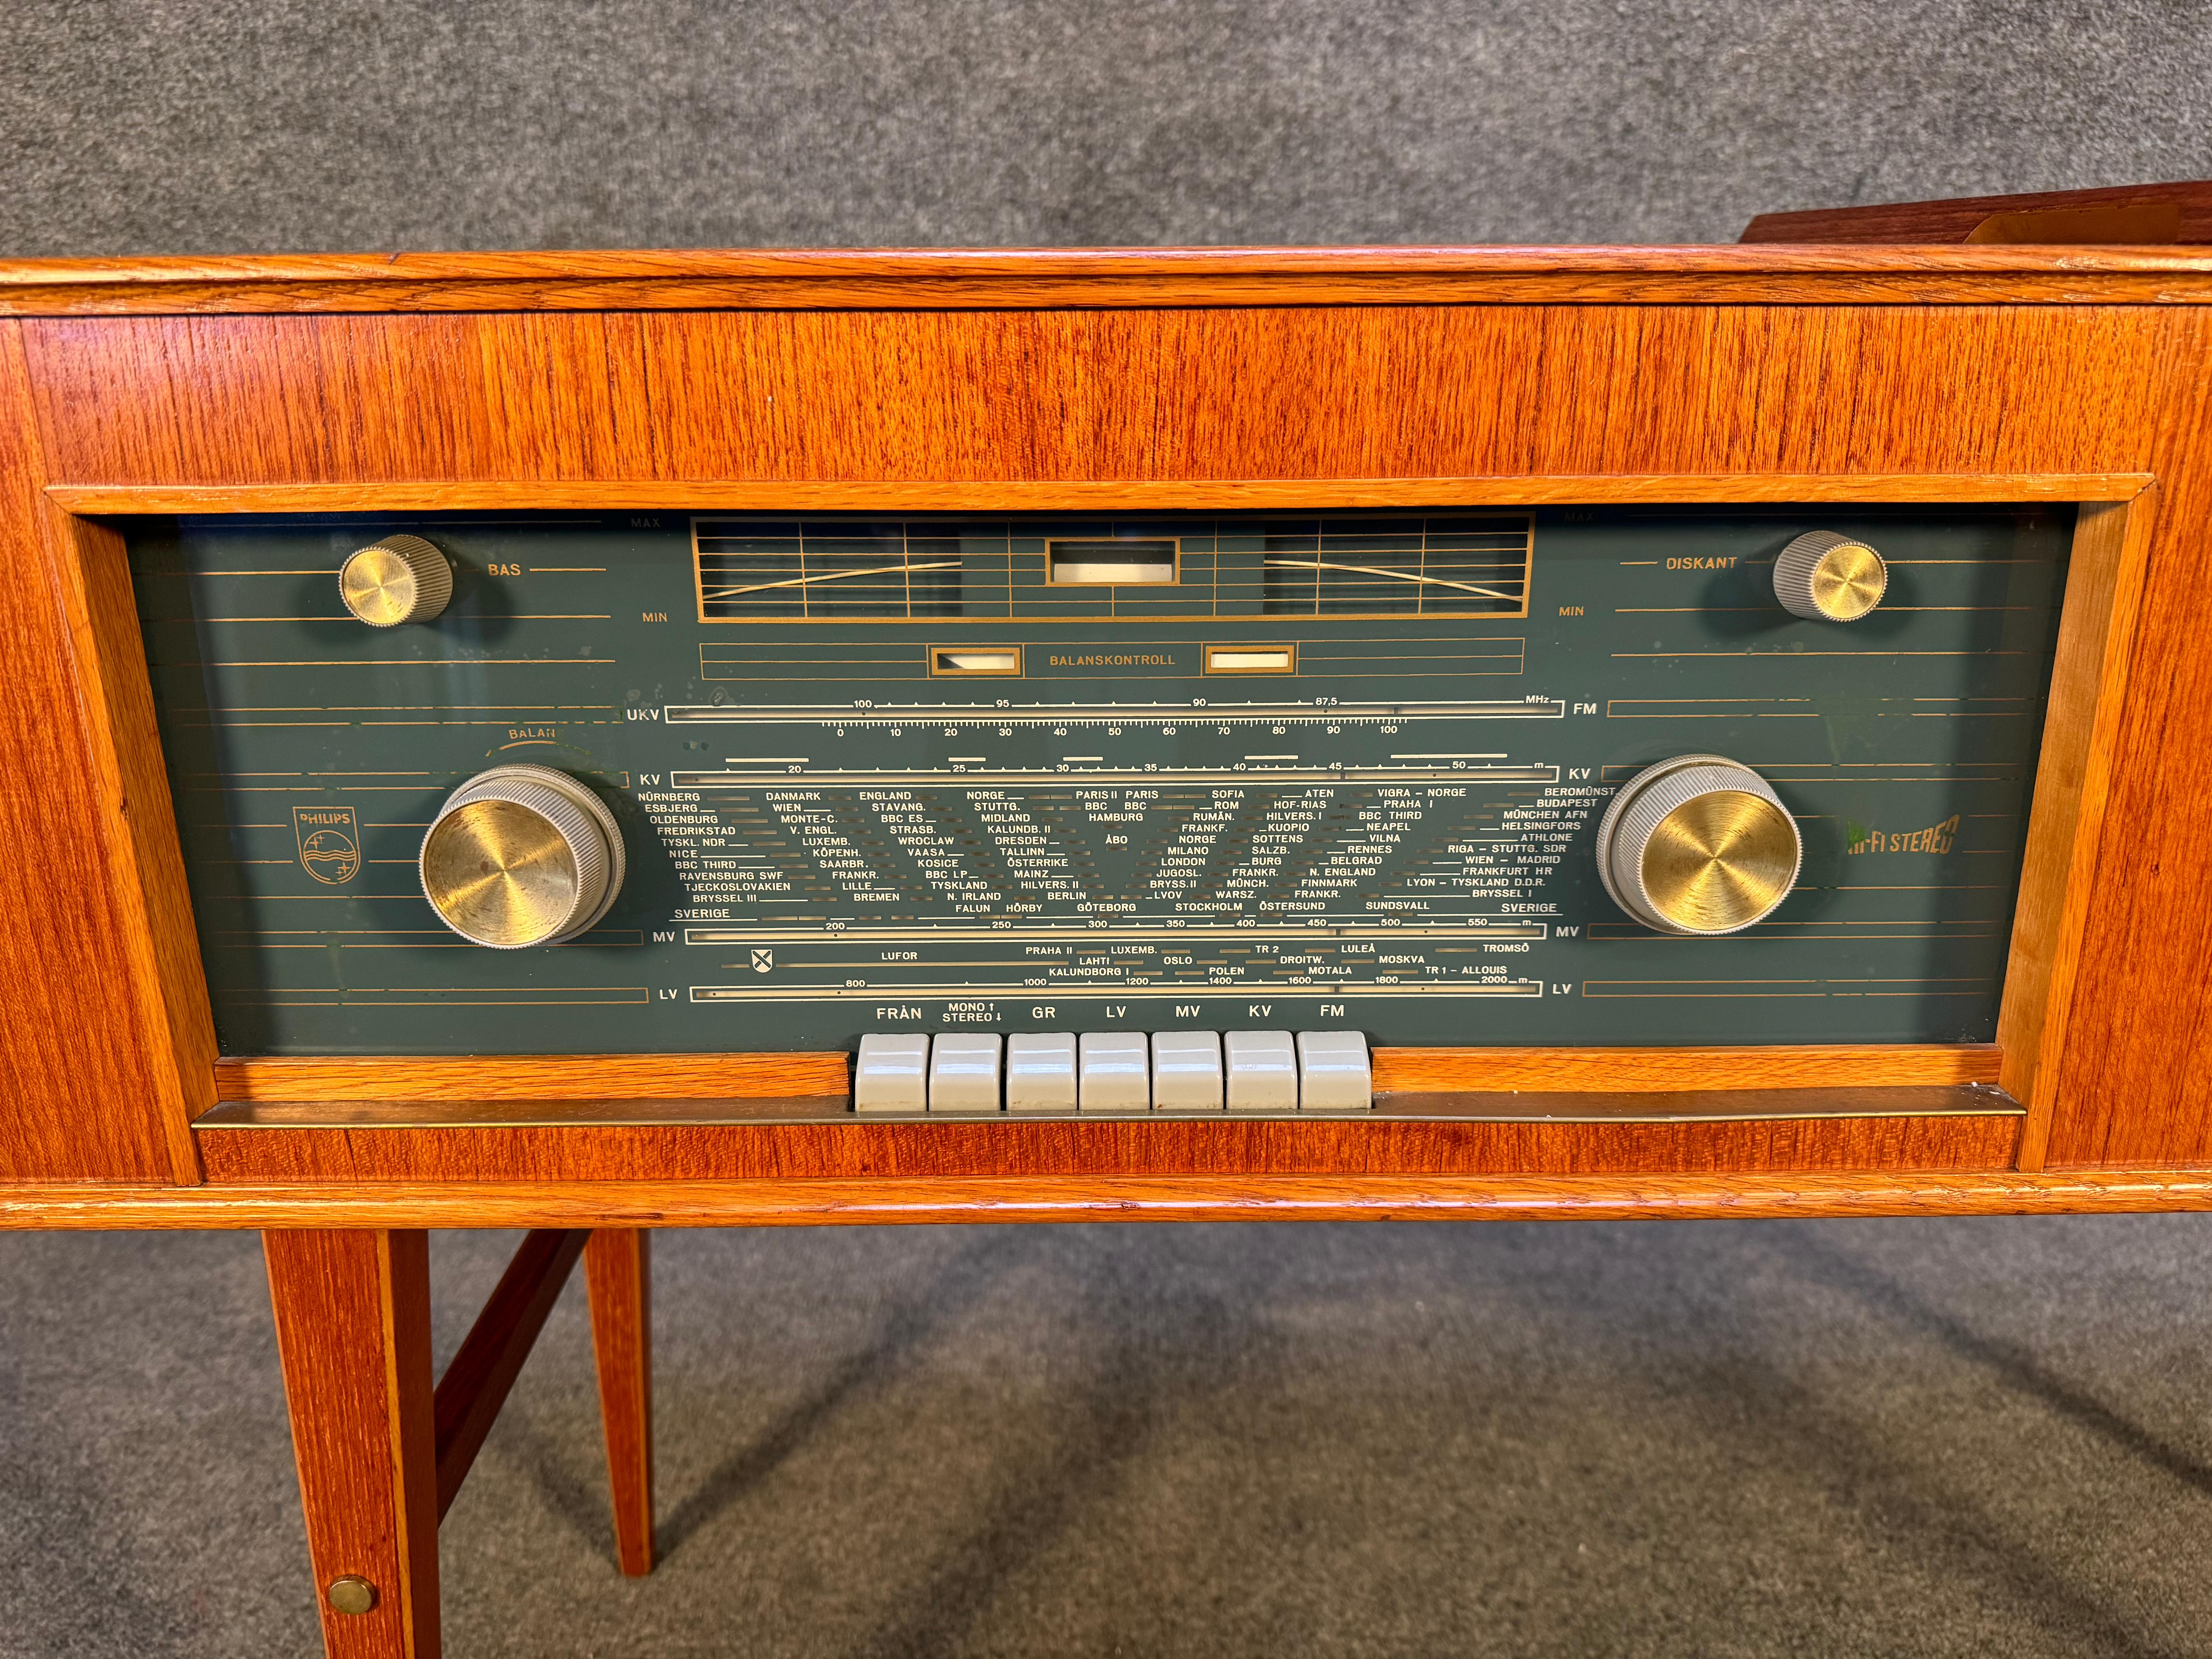 Here is a beautiful Scandinavian modern compact stereo console in teak and oak manufactured by Phillips in Sweden in the 1960's. This lovely piece, recently imported from Europe to California before its refinishing, features a beautiful cabinet